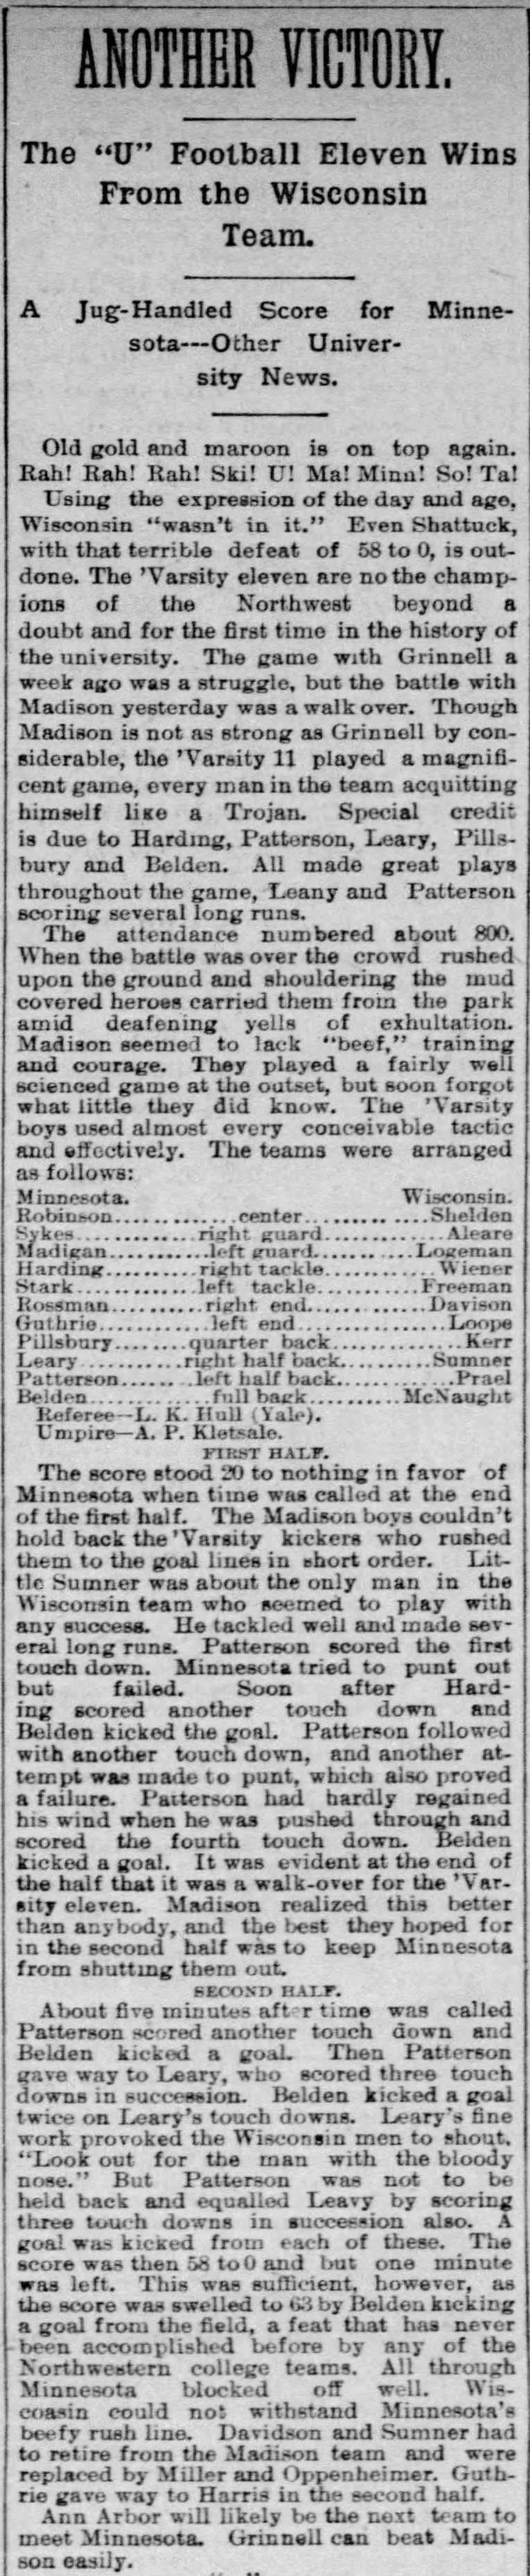 First Minnesota-Wisconsin rivalry game 1890